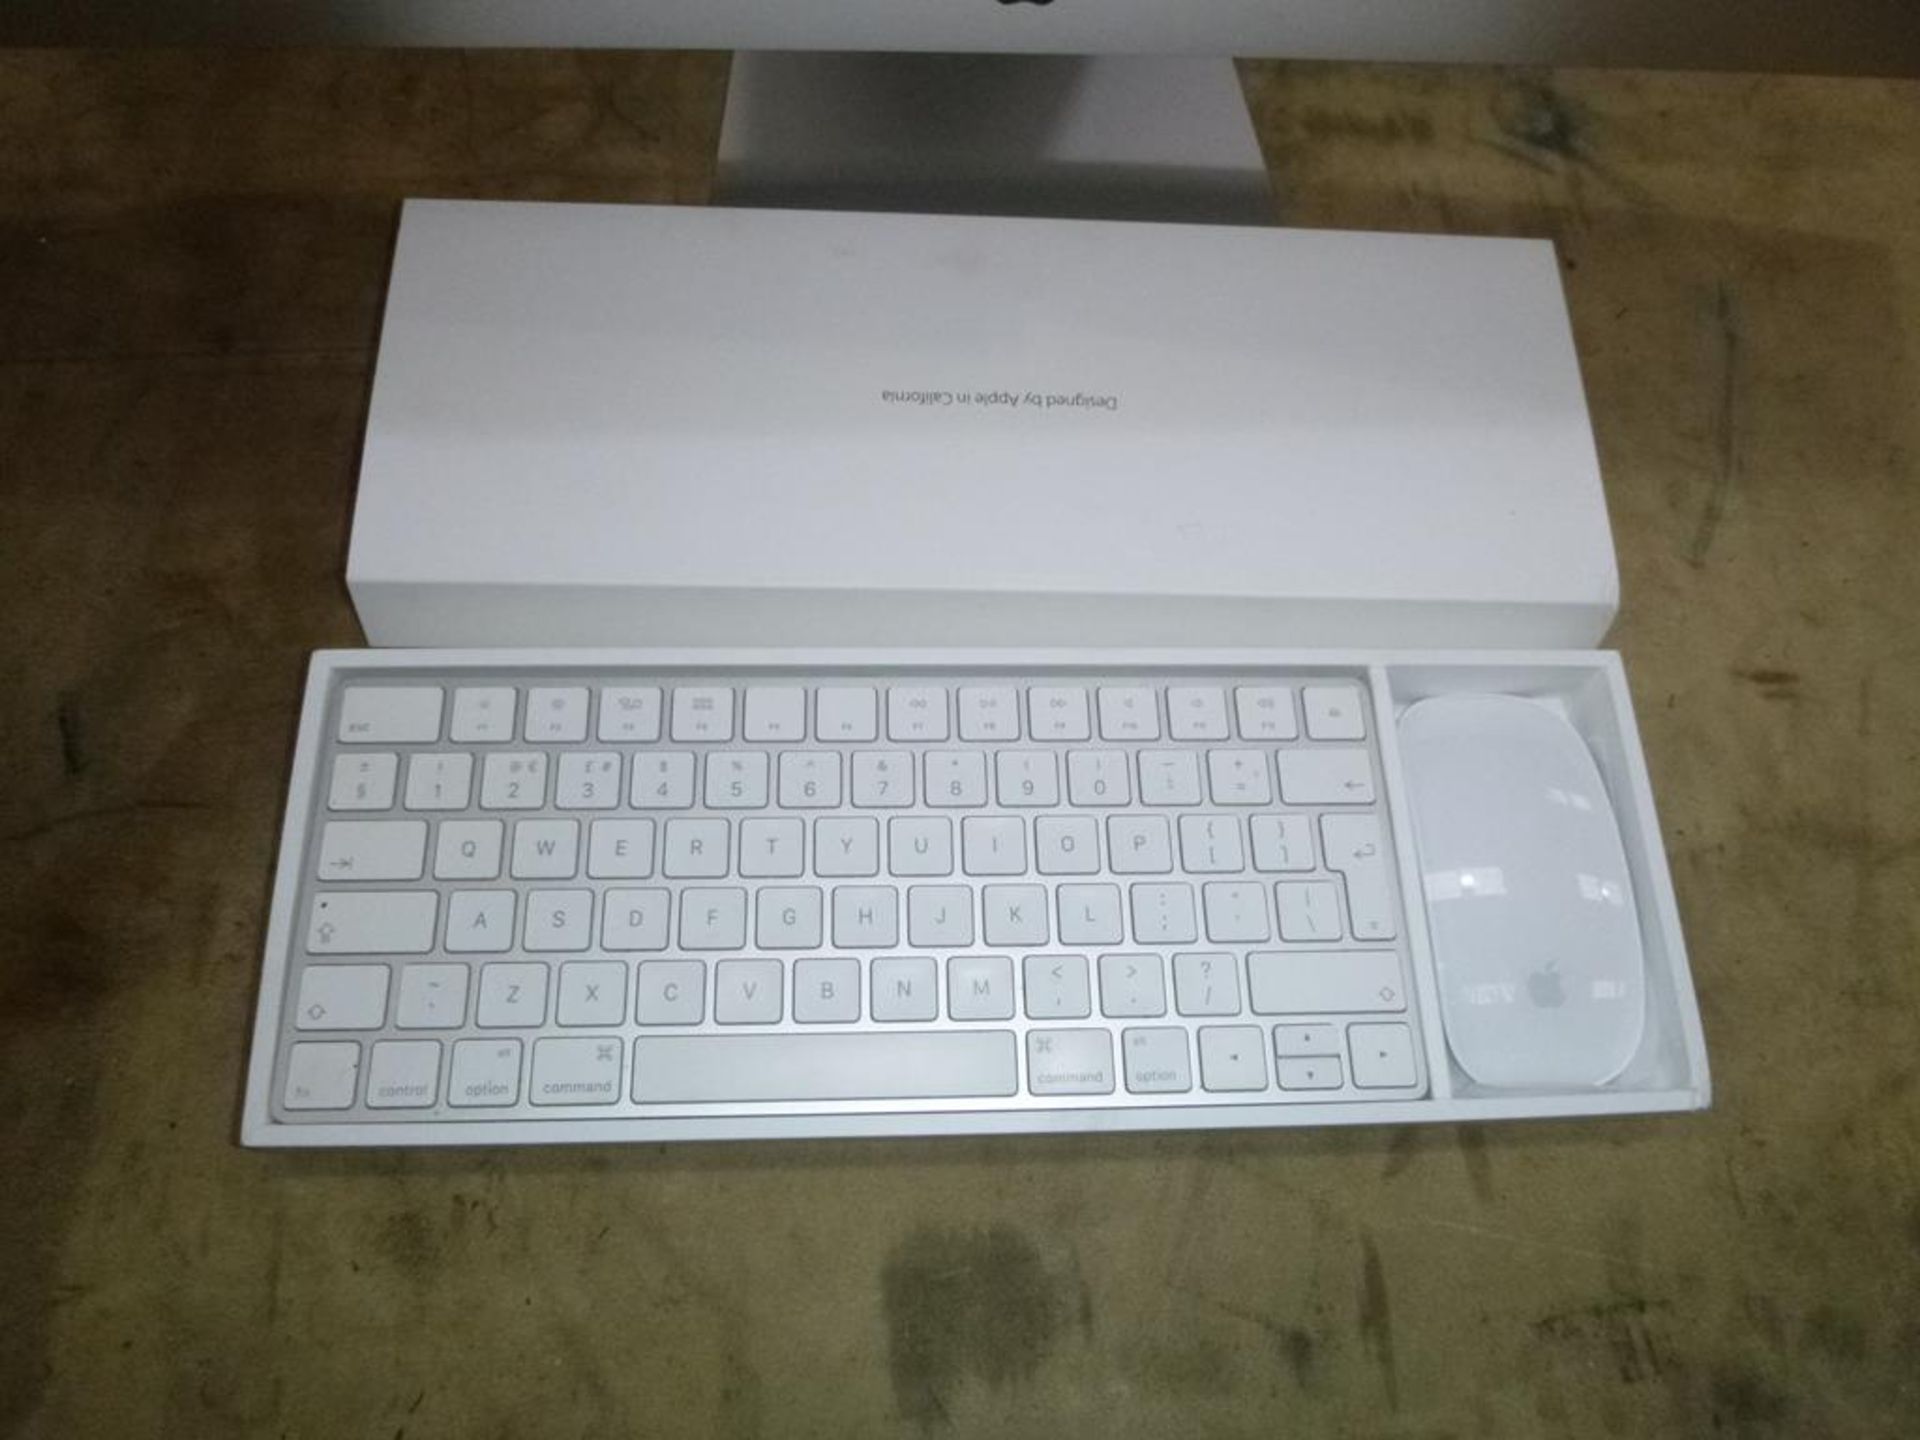 * Apple iMac 27'' Computer Model number A1419 with Apple Keyboard, Mouse and Power Cable (boxed) - Image 5 of 7